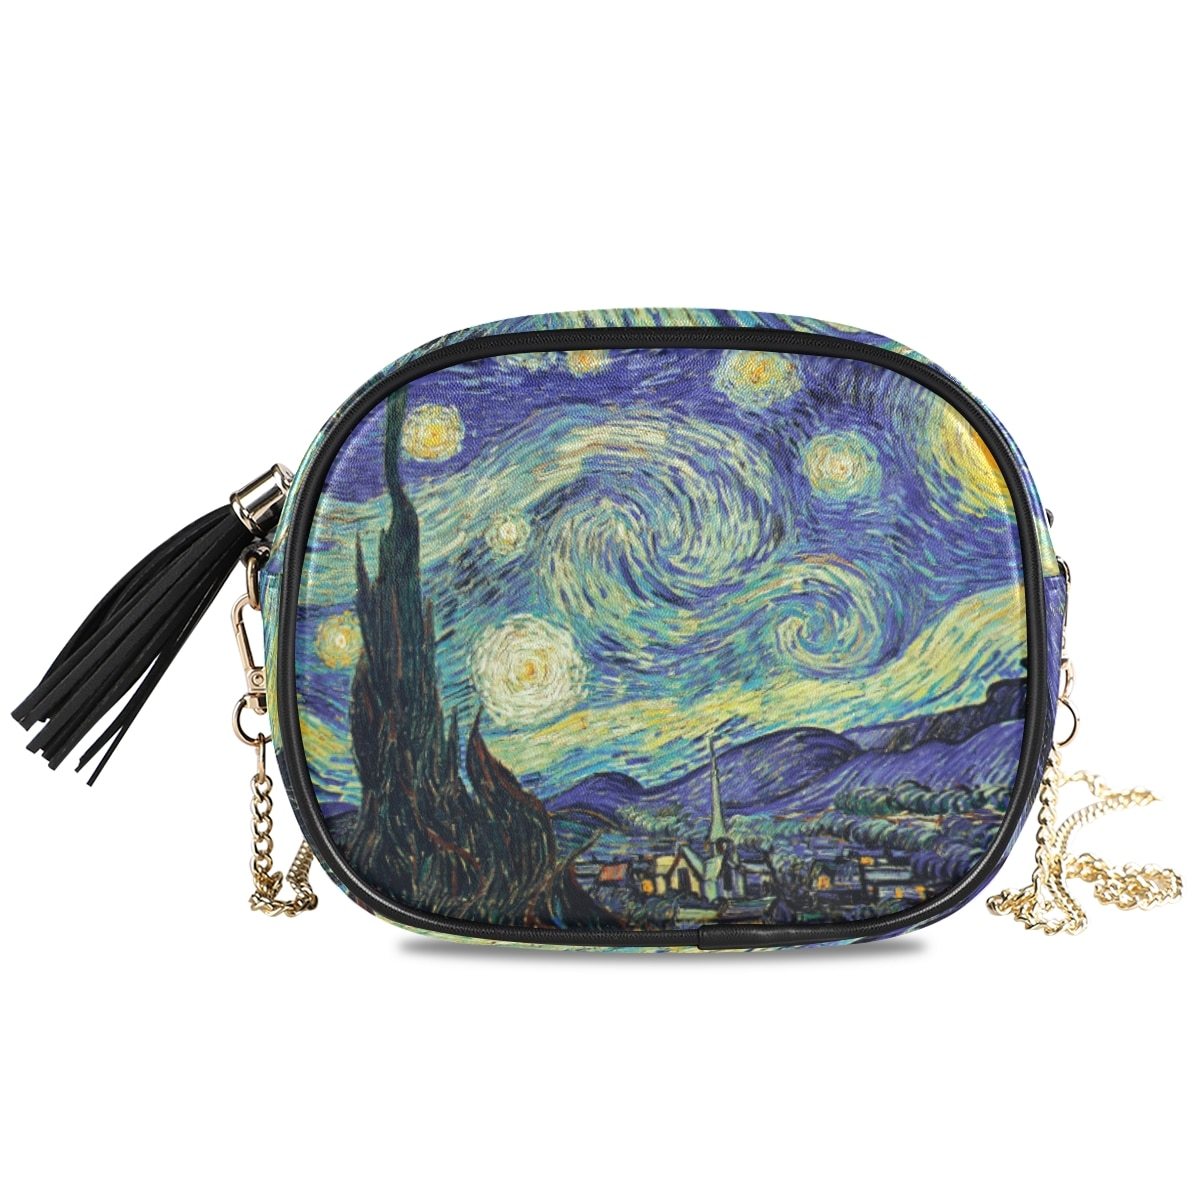 Primary image for HOT Small Shoulder Bag For Women Messenger Bags Ladies Retro Leather Van Gogh Oi